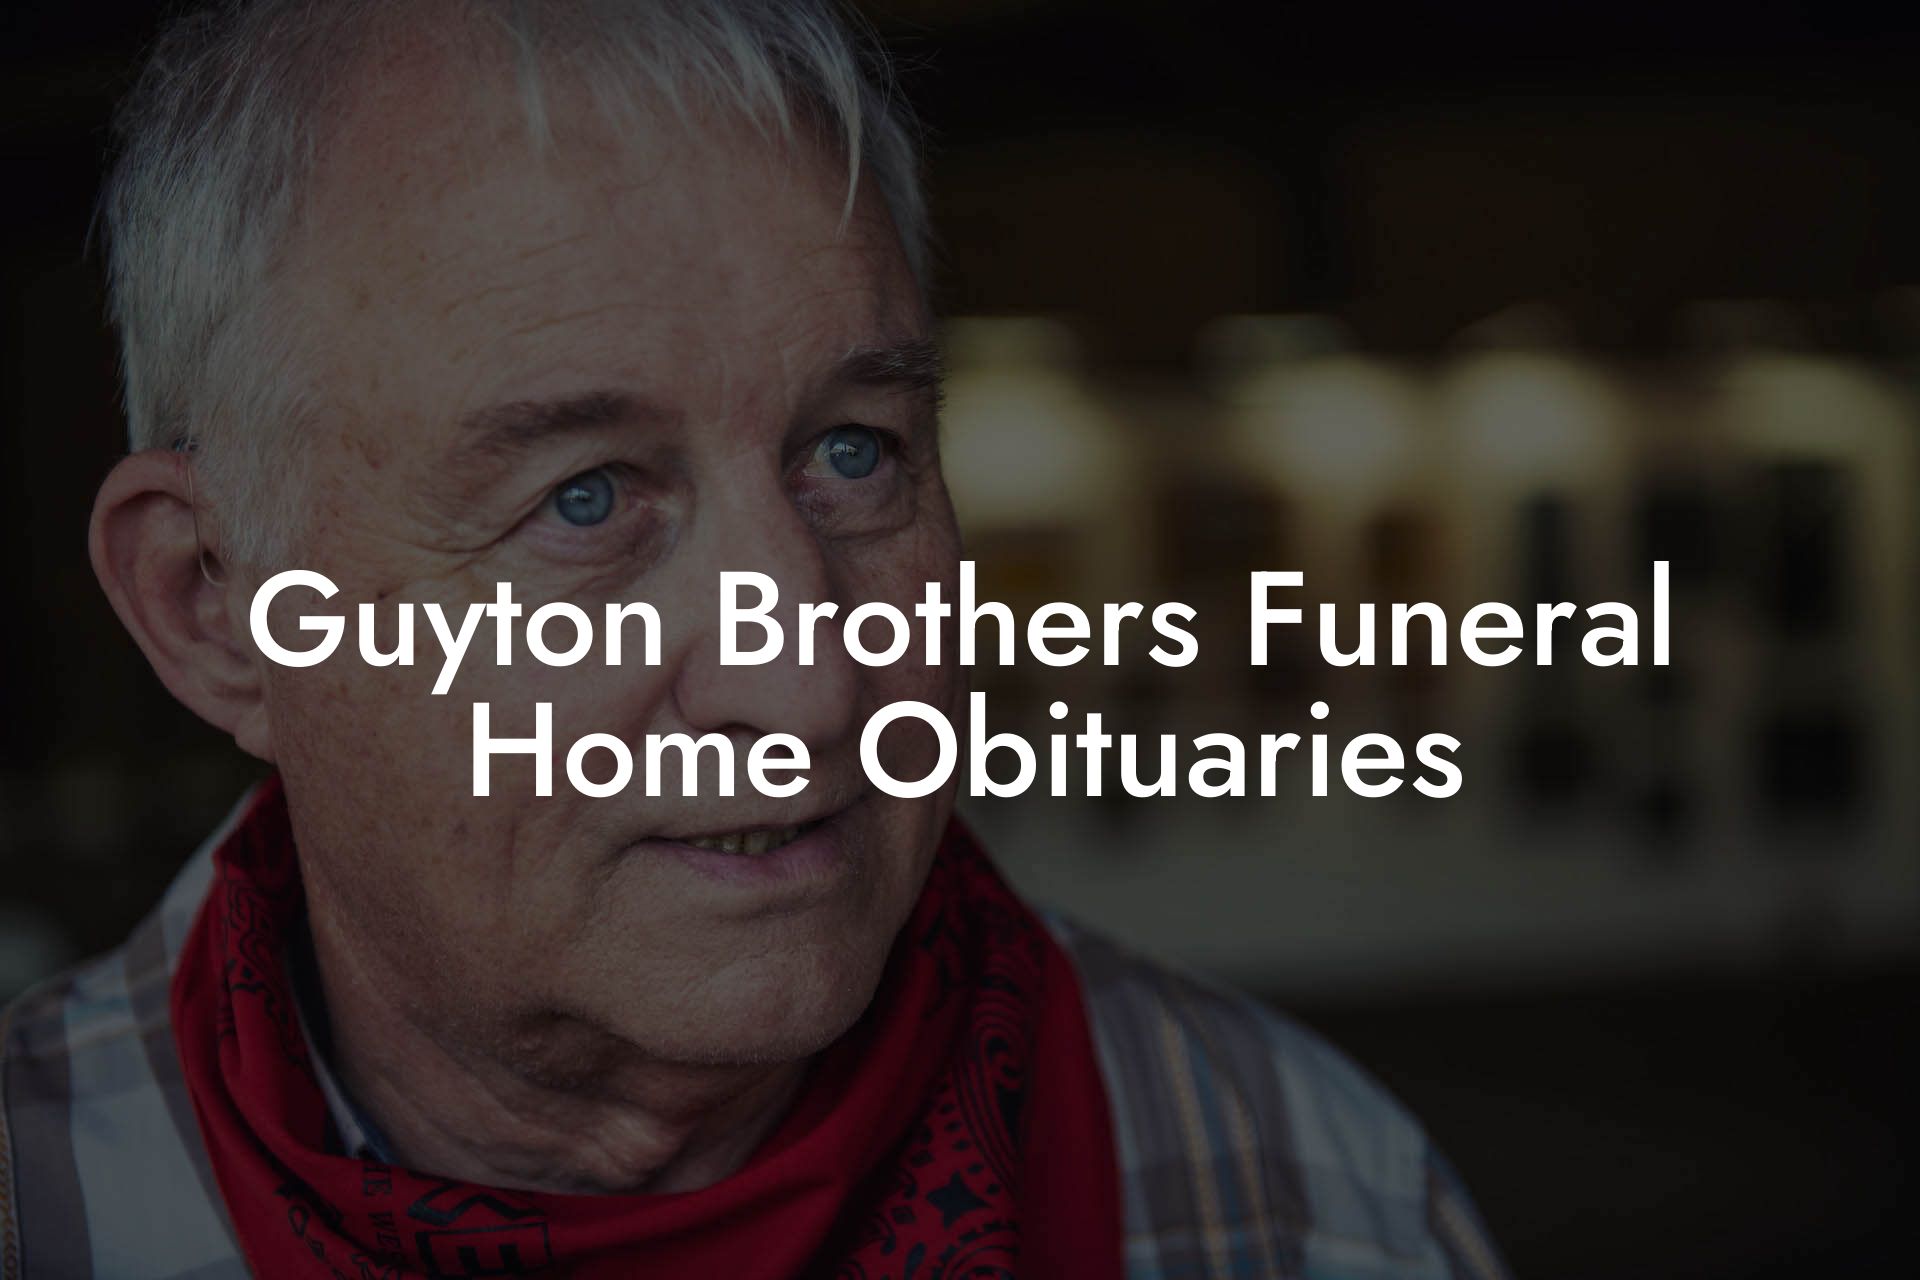 Guyton Brothers Funeral Home Obituaries